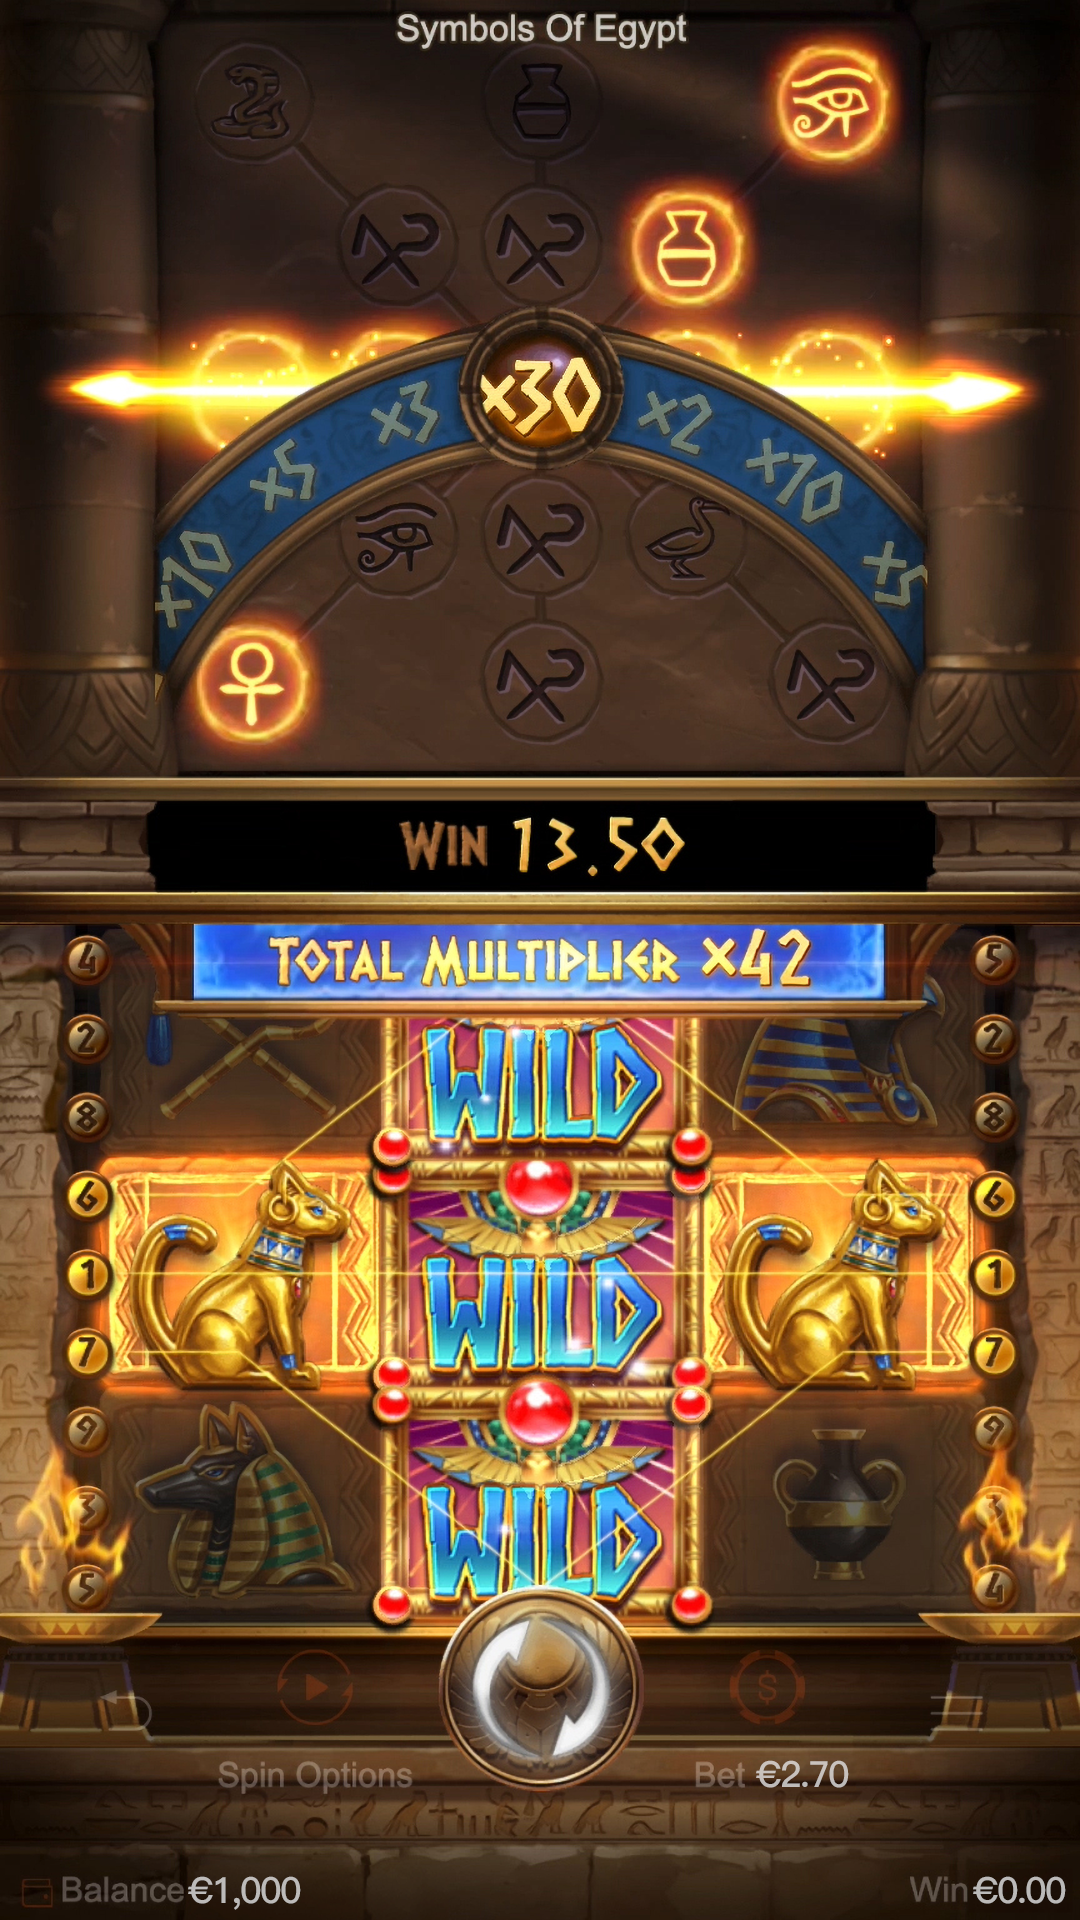 heart of egypt slot machines online for fun